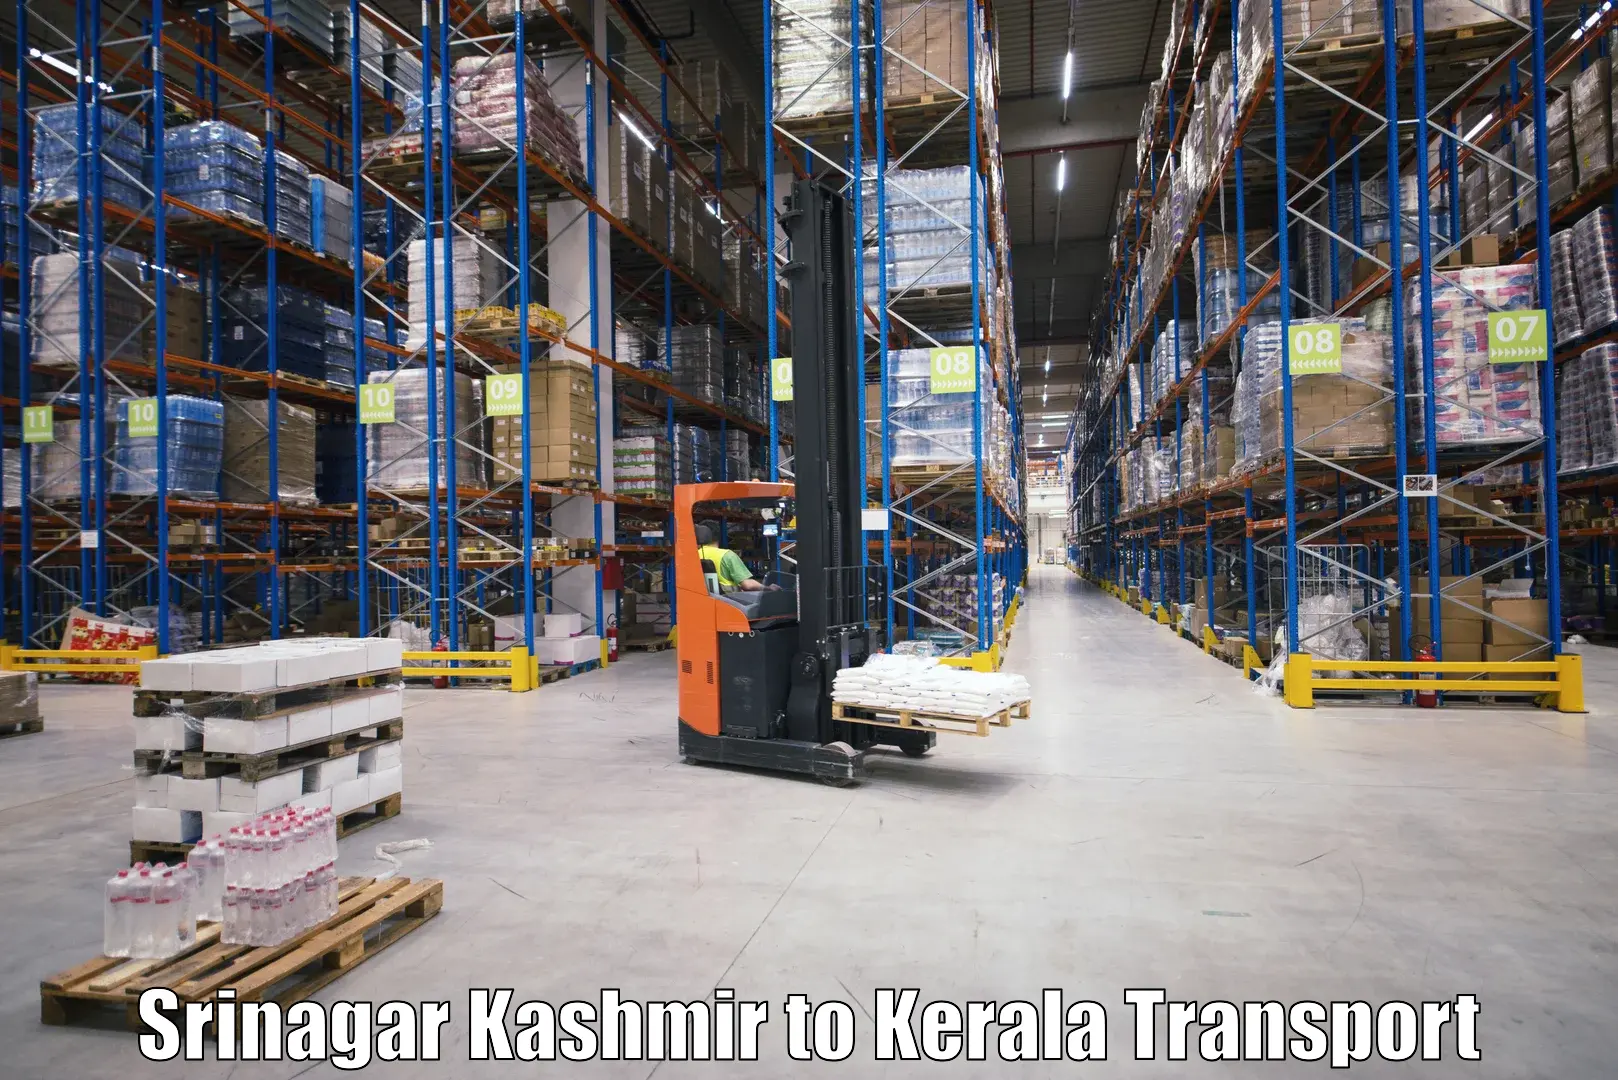 Transport bike from one state to another Srinagar Kashmir to Kannur